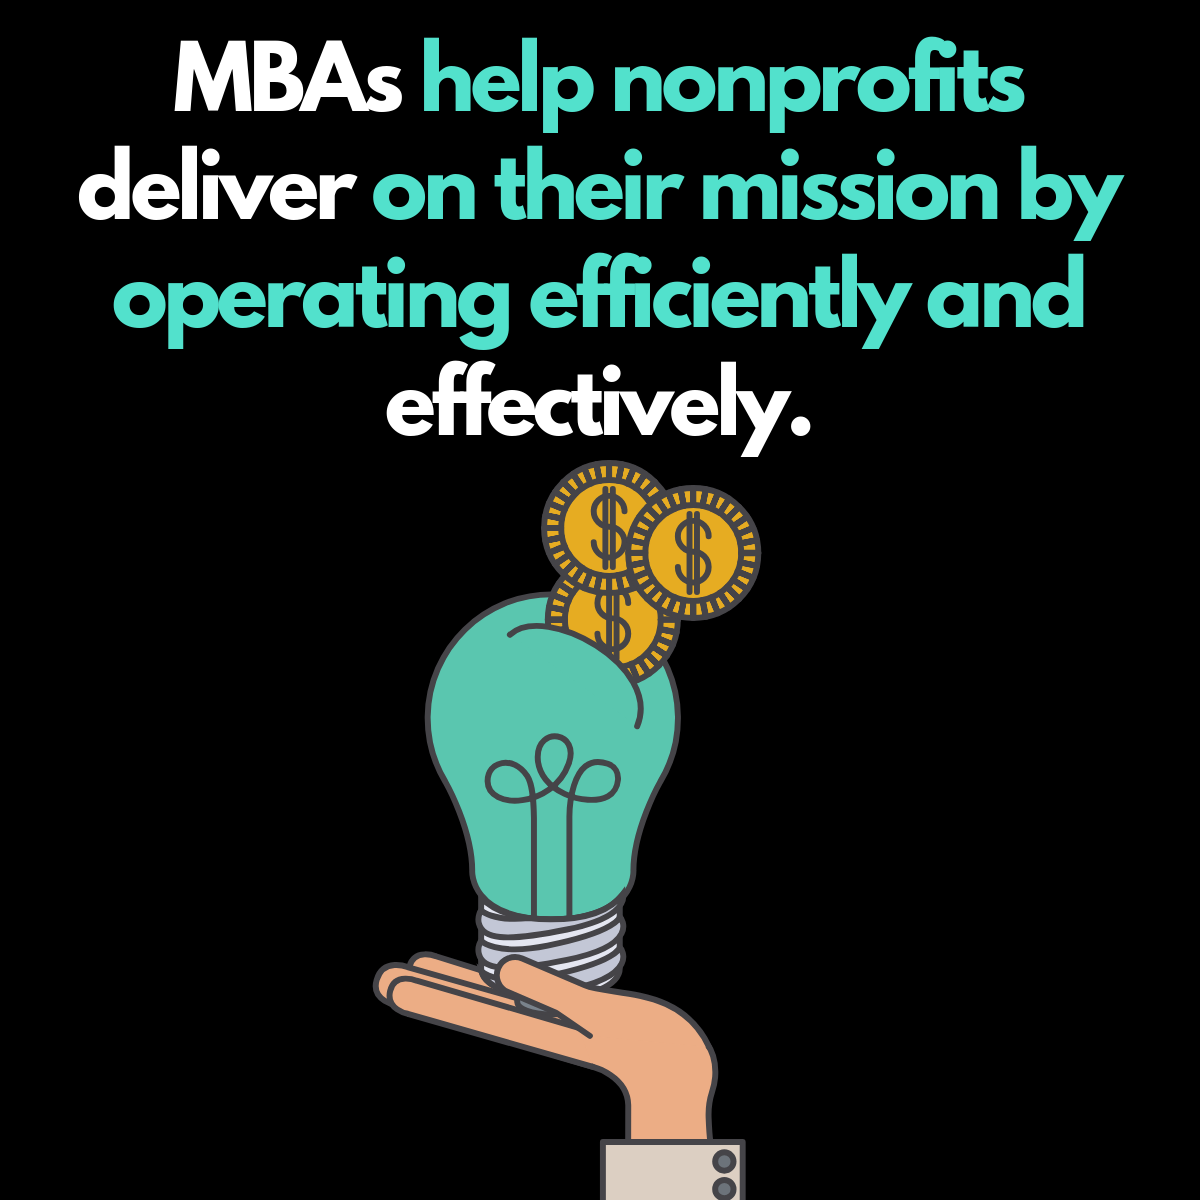 MBAs help nonprofits deliver on their mission by operating efficiently and effectively.